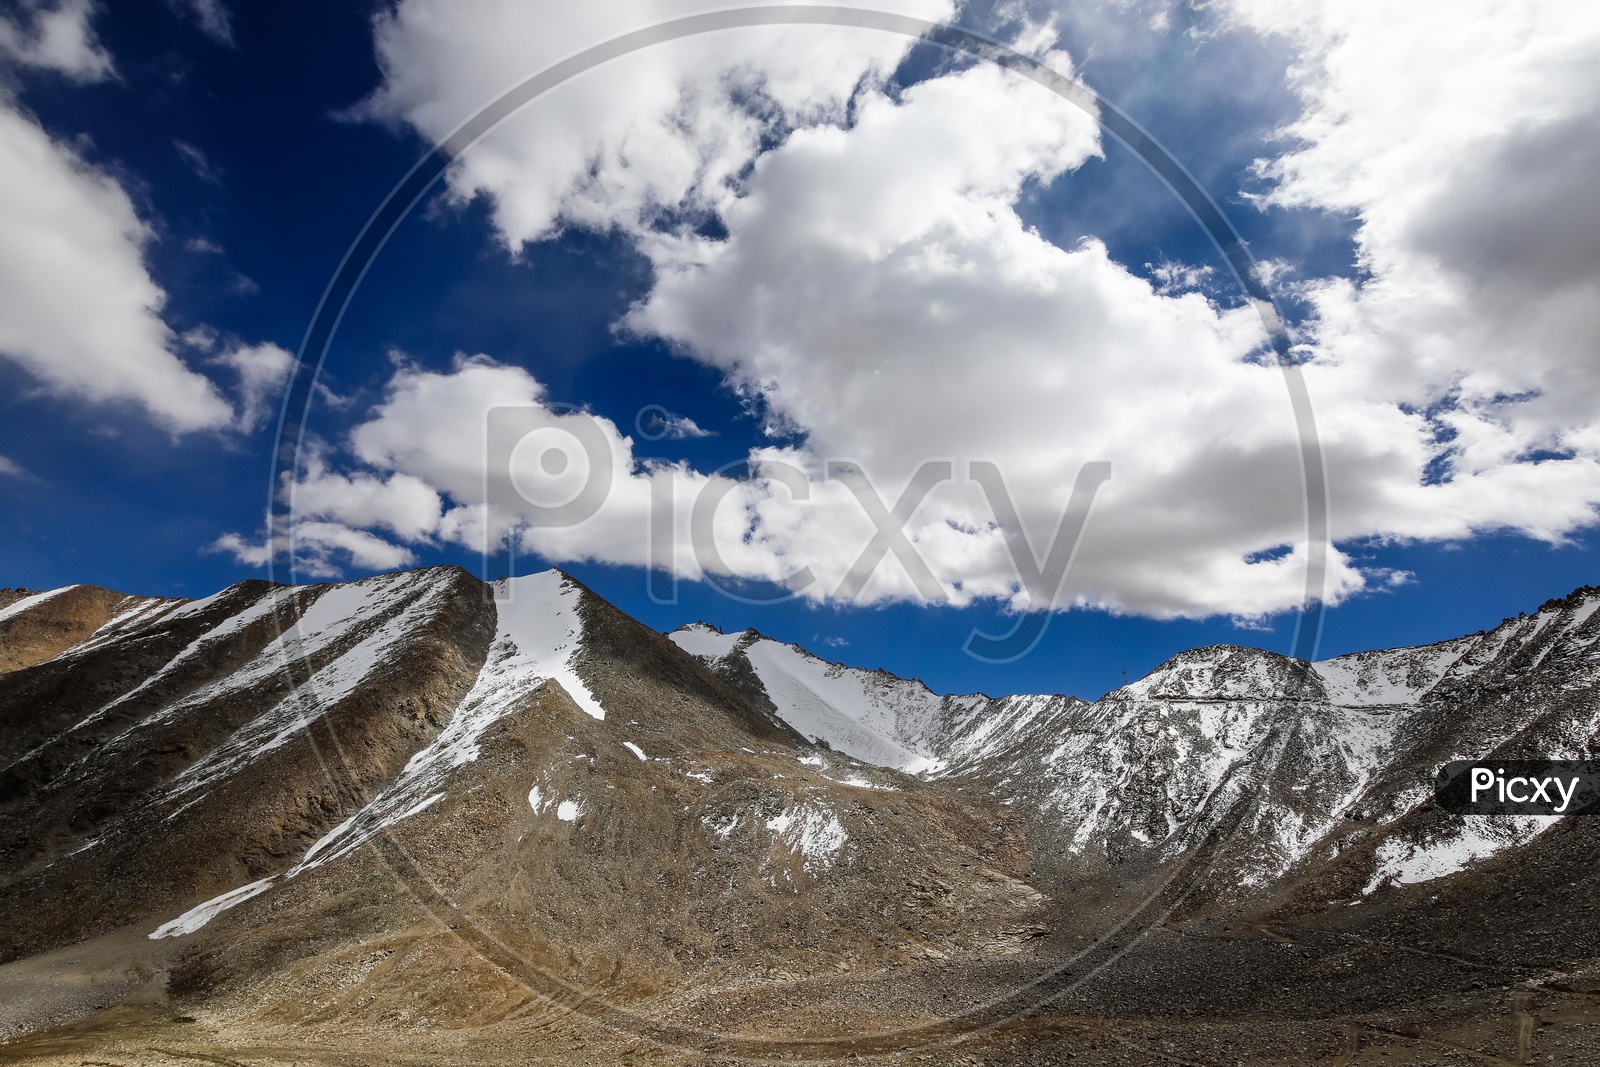 Landscape of snow capped mountains along with the clouds